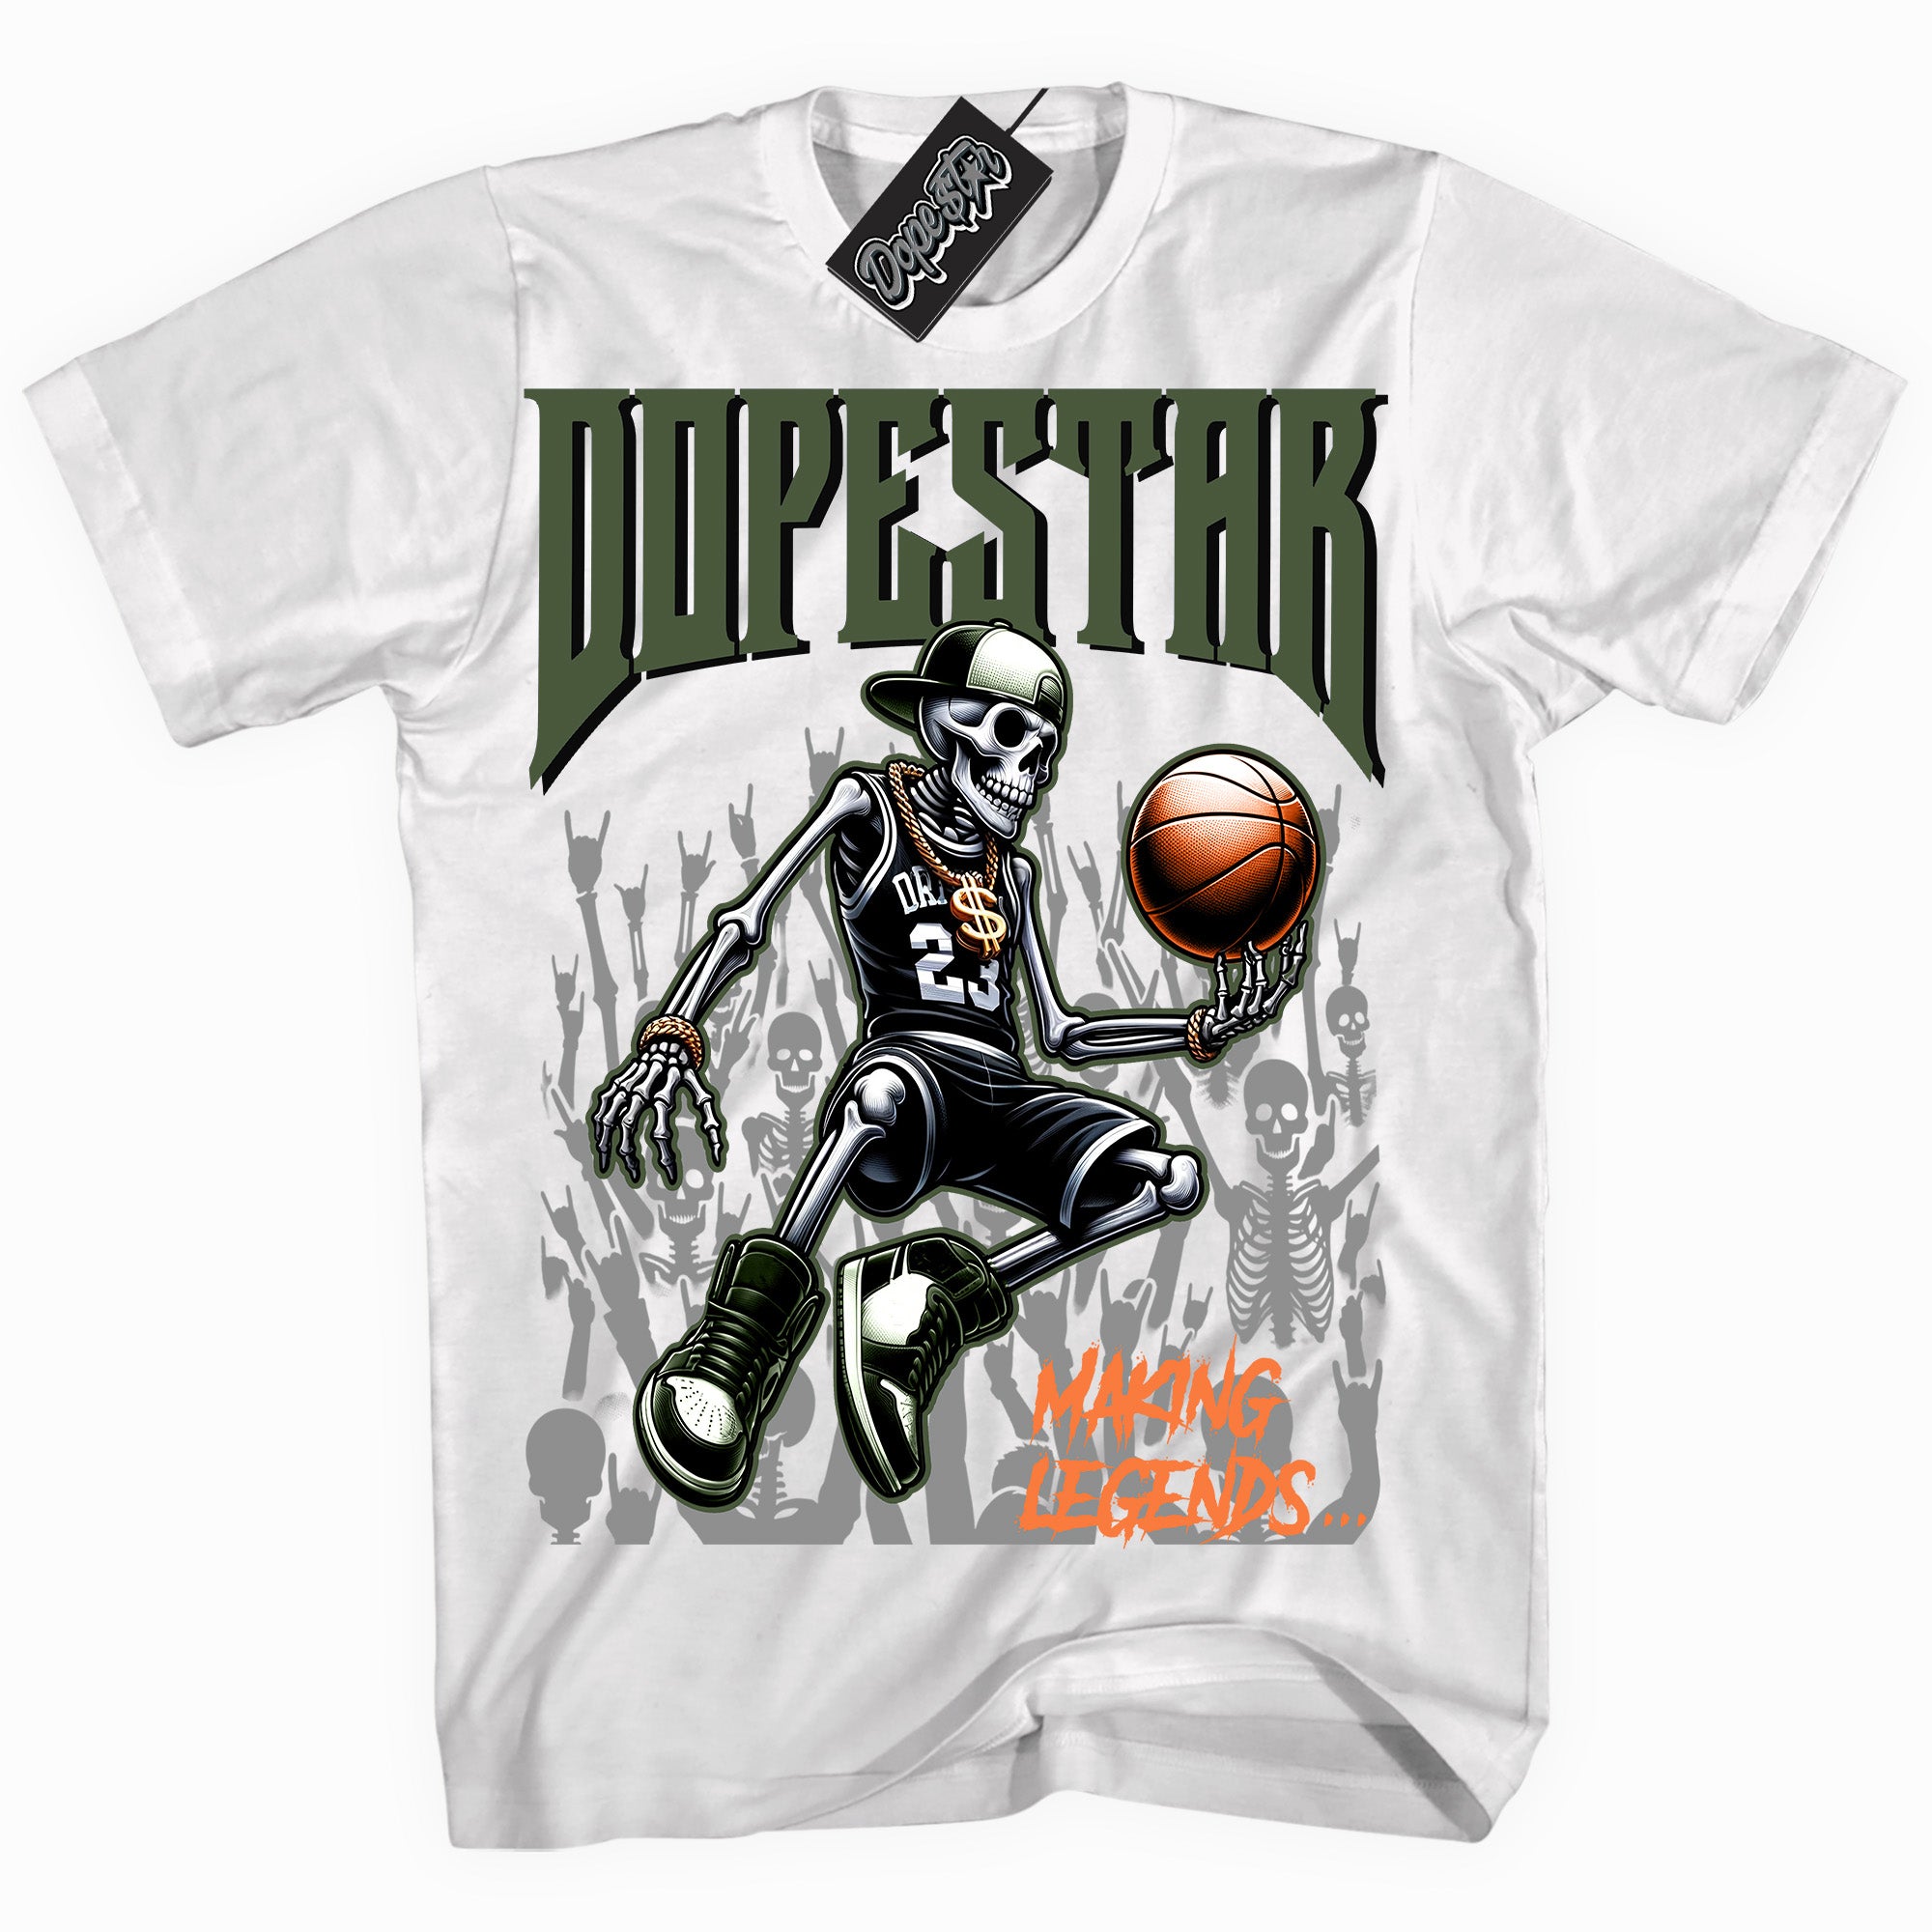 Cool White graphic tee with “ Making Legends ” print, that perfectly matches Olive 5s sneakers